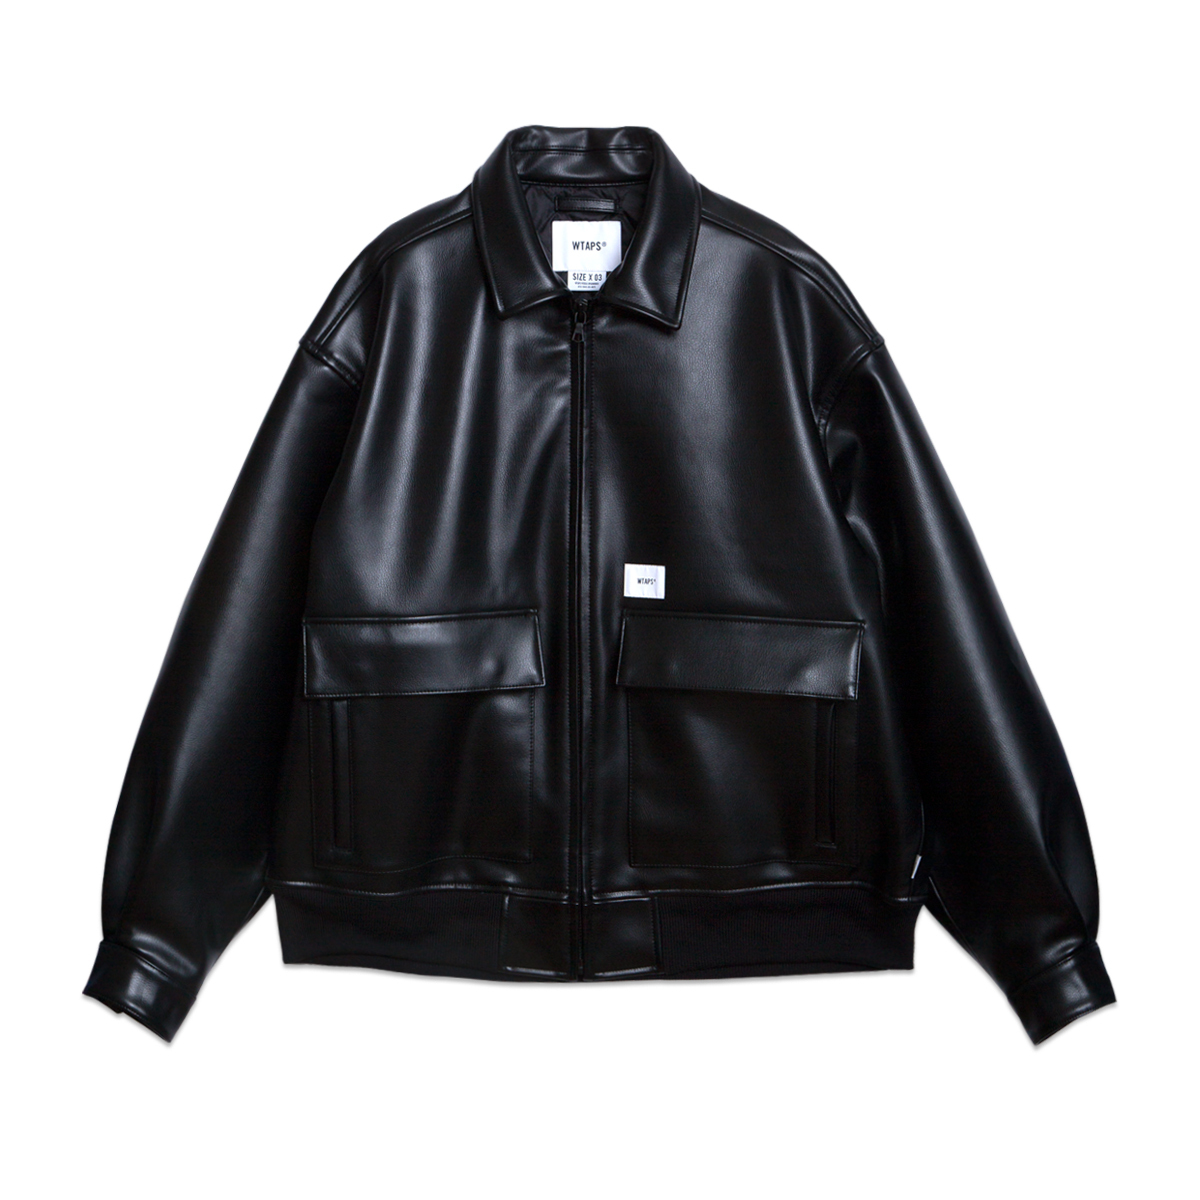 WTAPS : JFW-01 /JACKET / SYNTHETIC. X3.0 – BELIEF MOSCOW